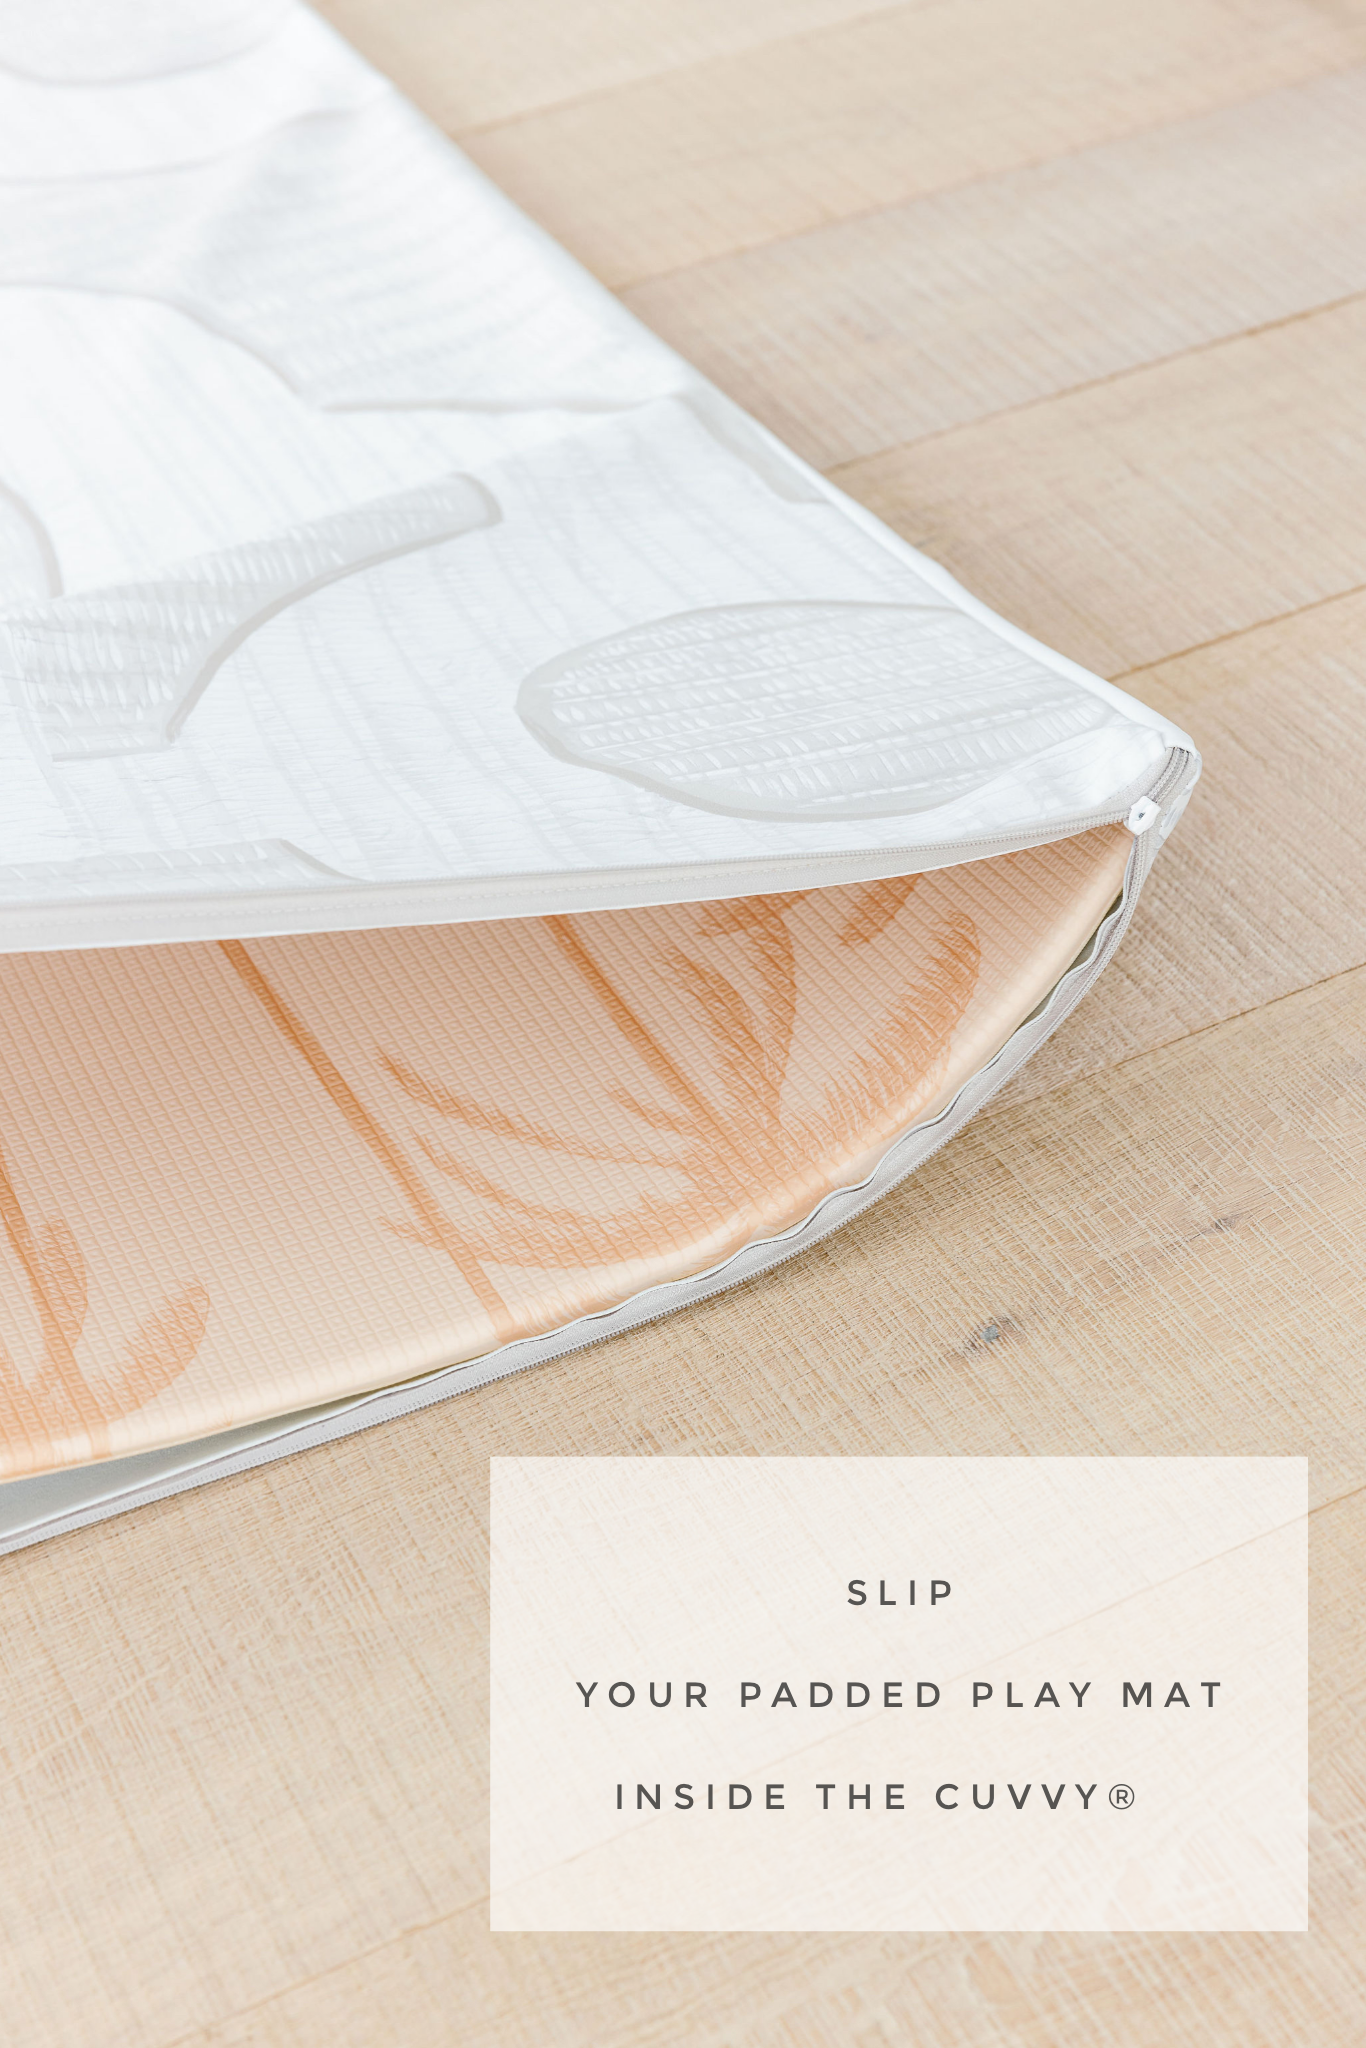 Softly Summer Cuvvy play mat cover, padded play mat, vegan leather, reversible, road play mat, palm tree, baby play mat